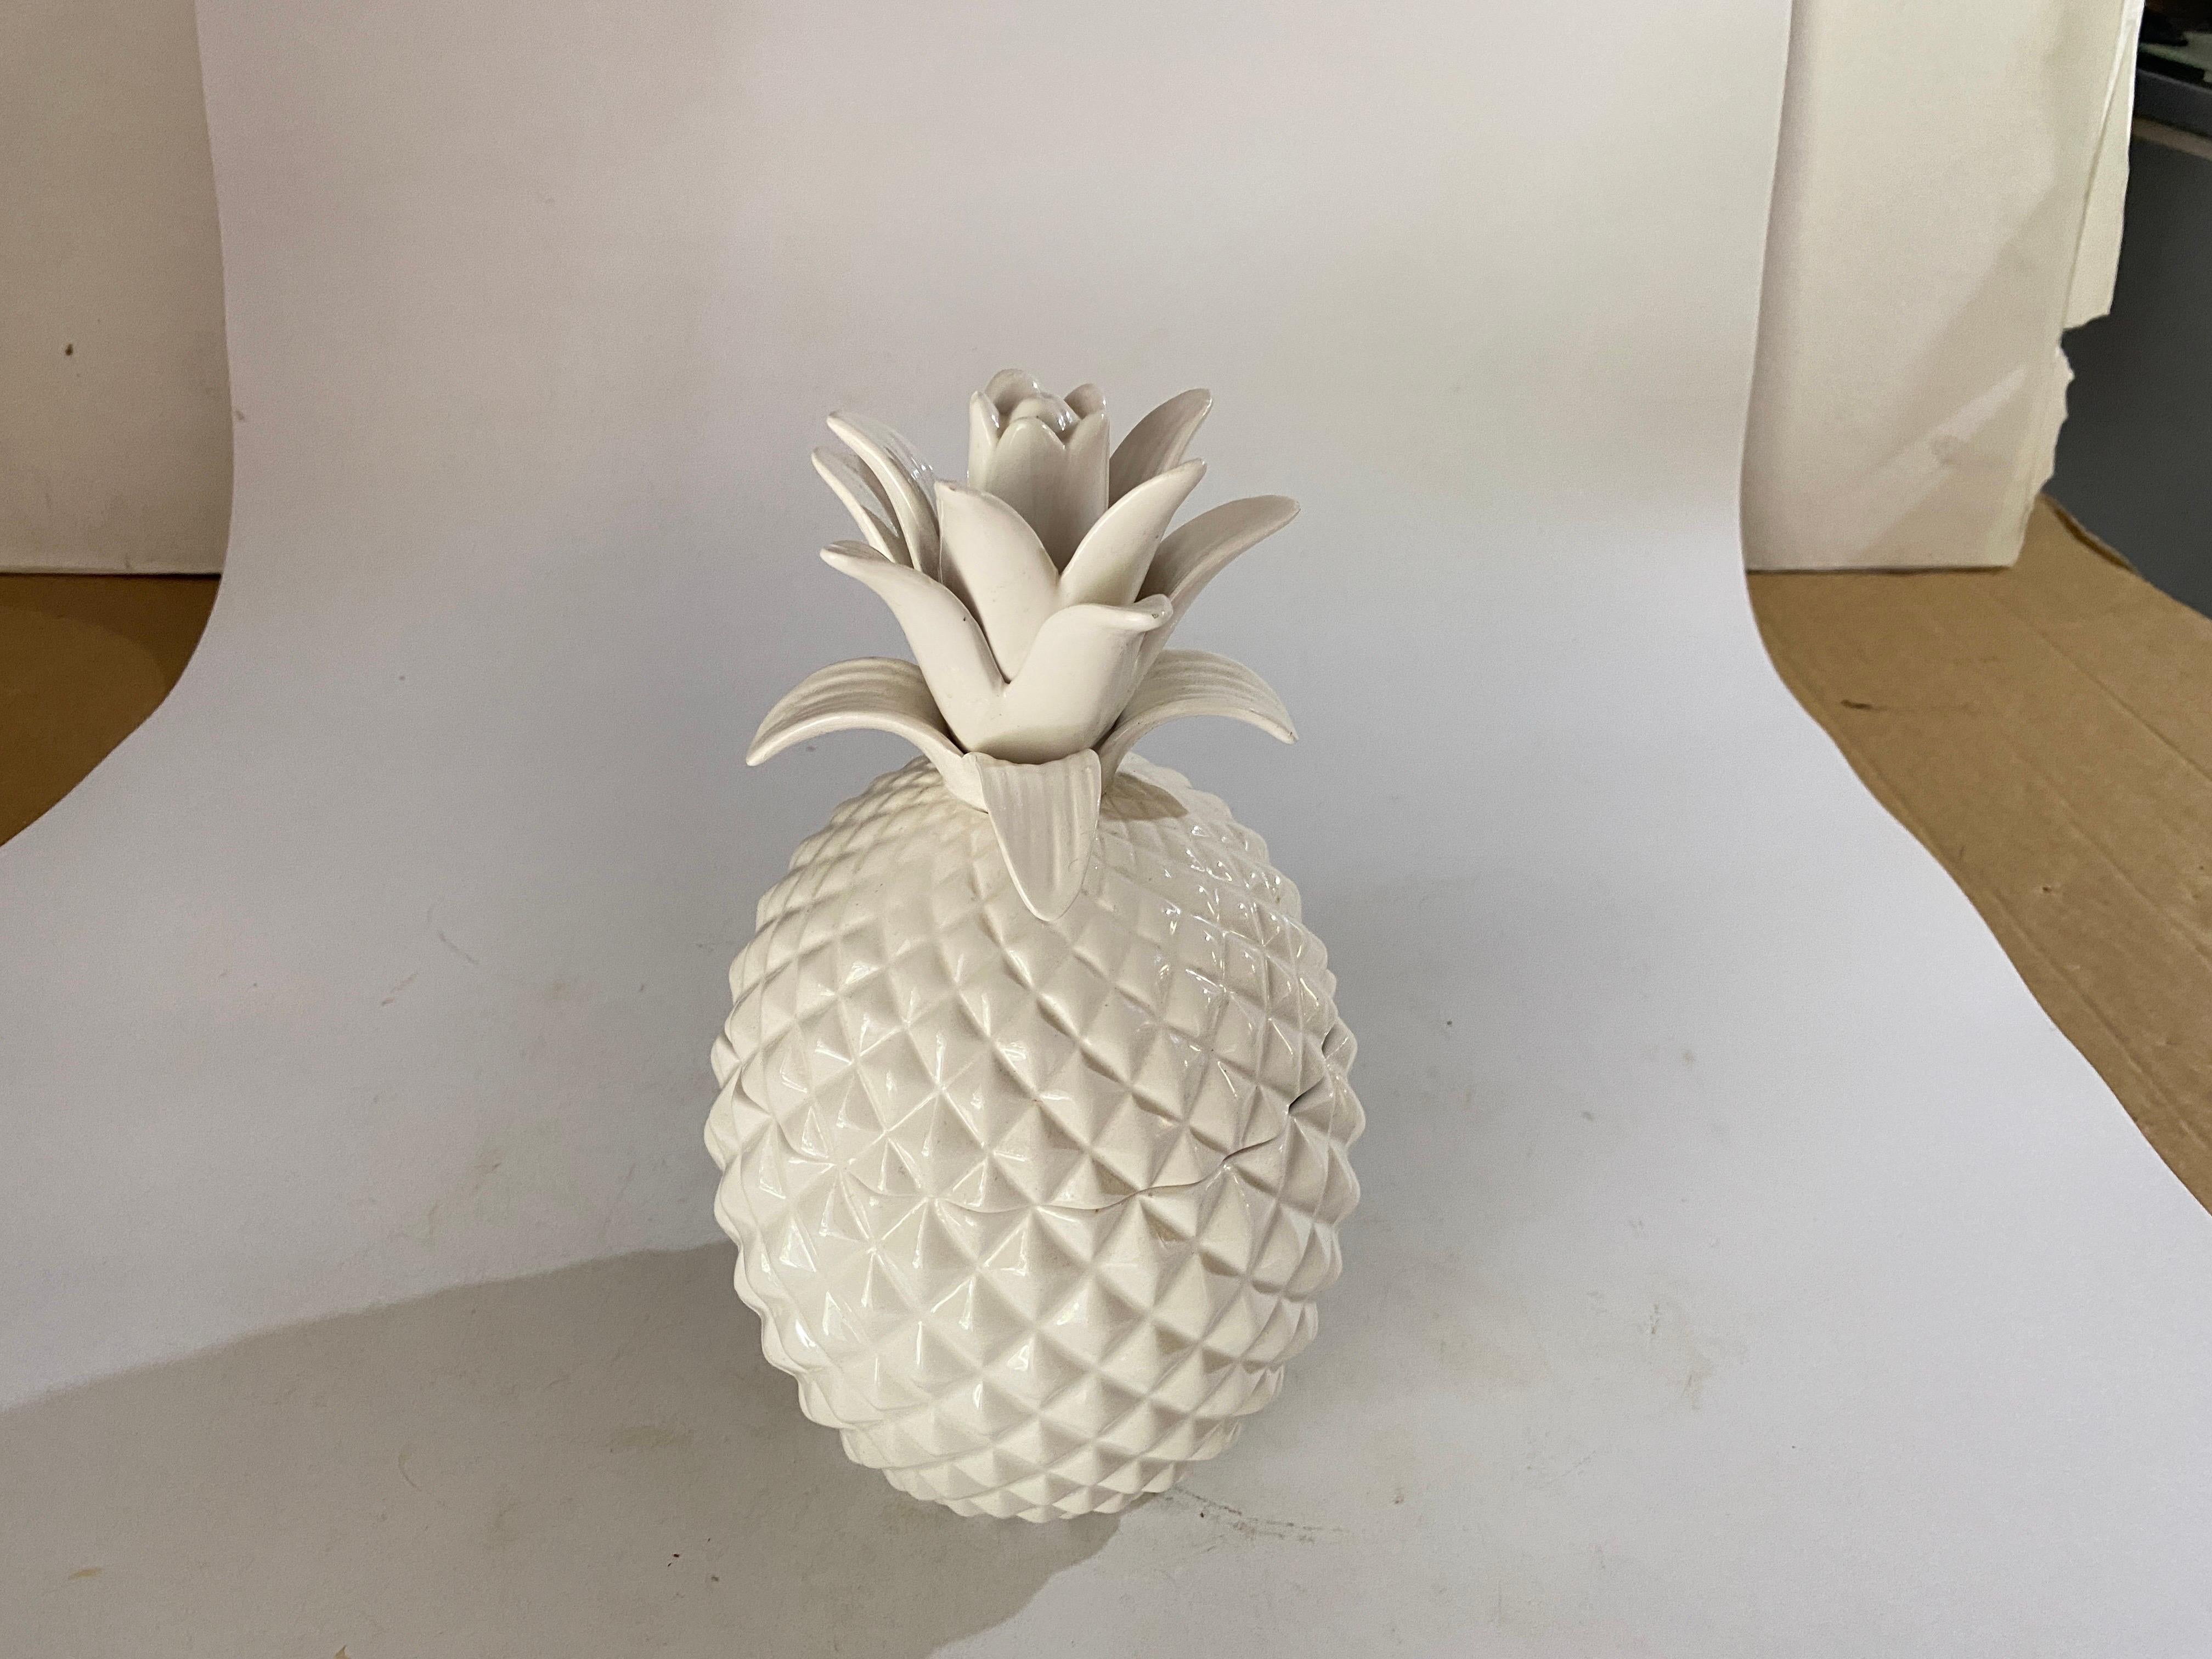 Portuguese Glazed Ceramic Pineapple Pot with Lid or Ice Bucket, 20th Century For Sale 4